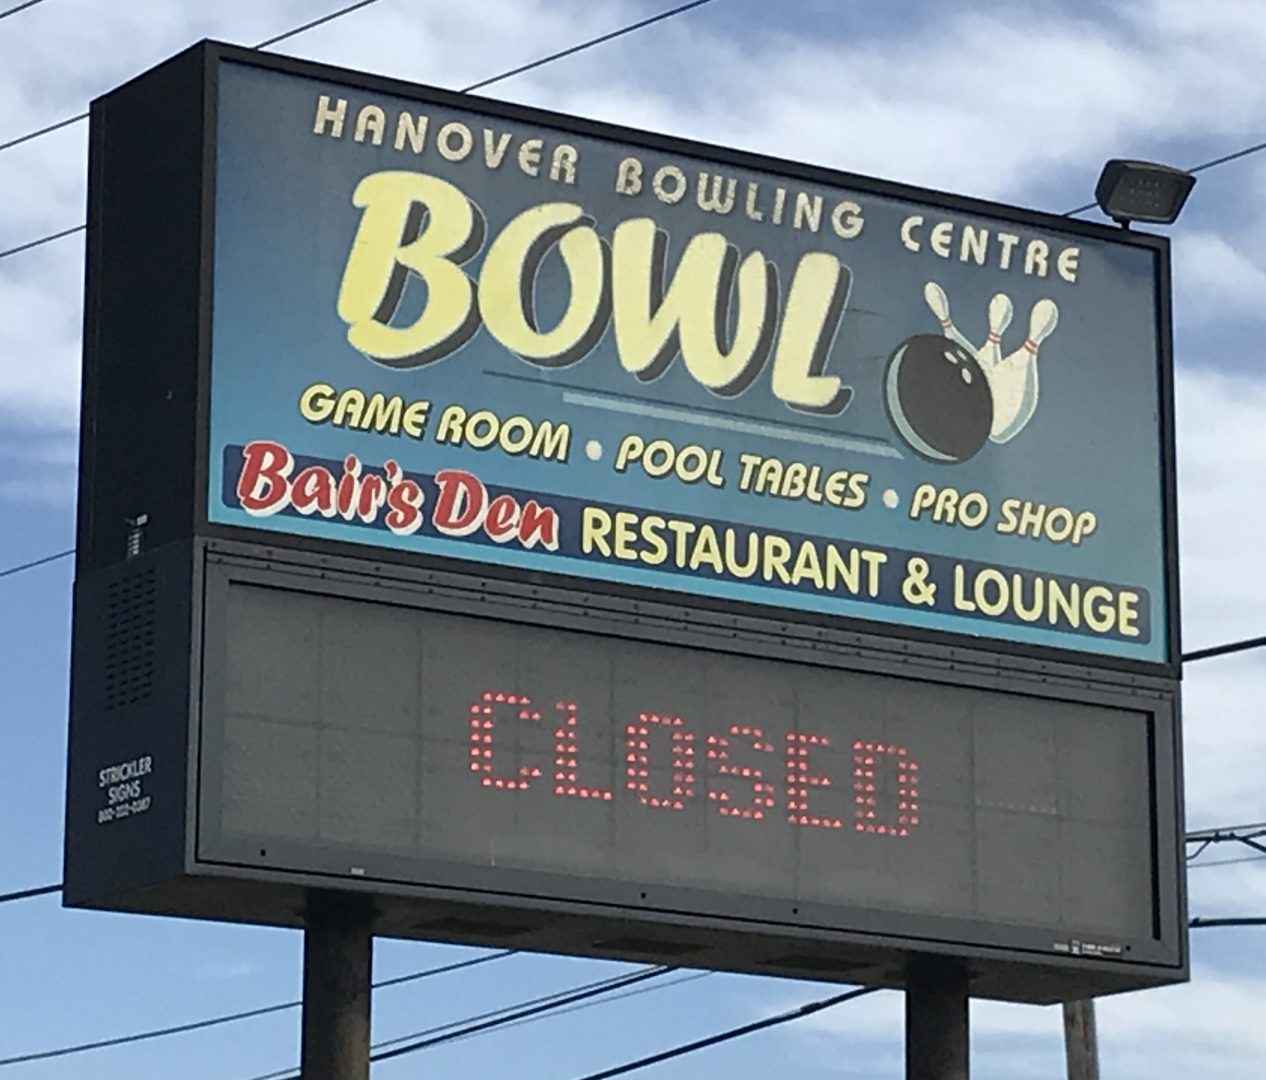 Entertainment businesses are among those shut down by Pennsylvania Gov. Tom Wolf during the coronavirus pandemic. The Hanover Bowling Centre is shown Saturday, March 21, 2020.